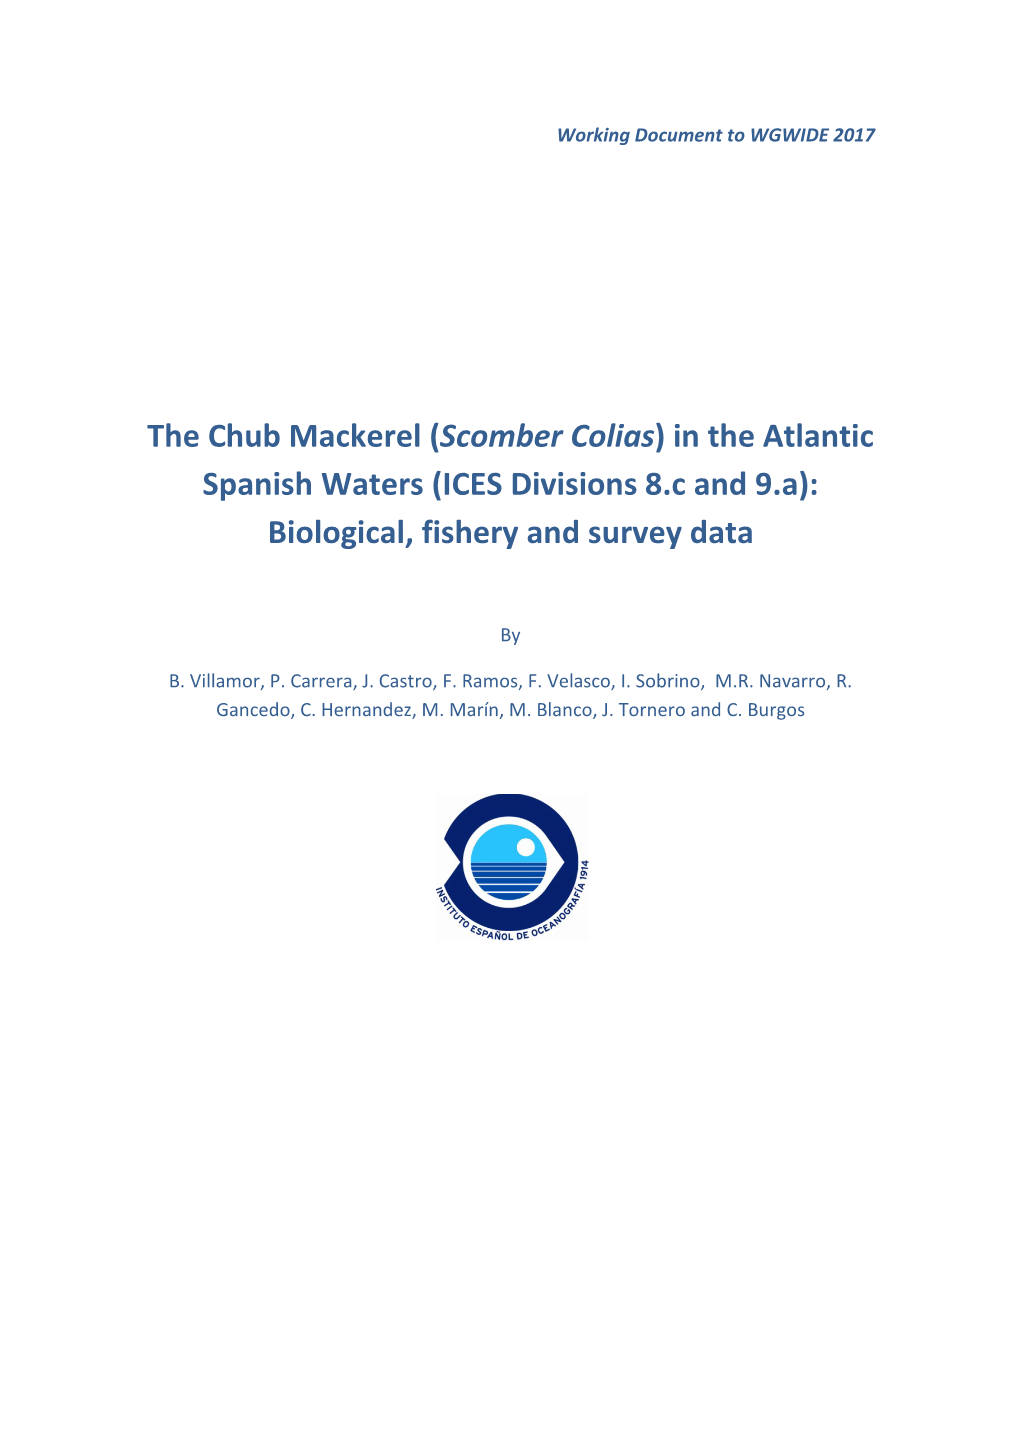 The Chub Mackerel (Scomber Colias) in the Atlantic Spanish Waters (ICES Divisions 8.C and 9.A): Biological, Fishery and Survey Data